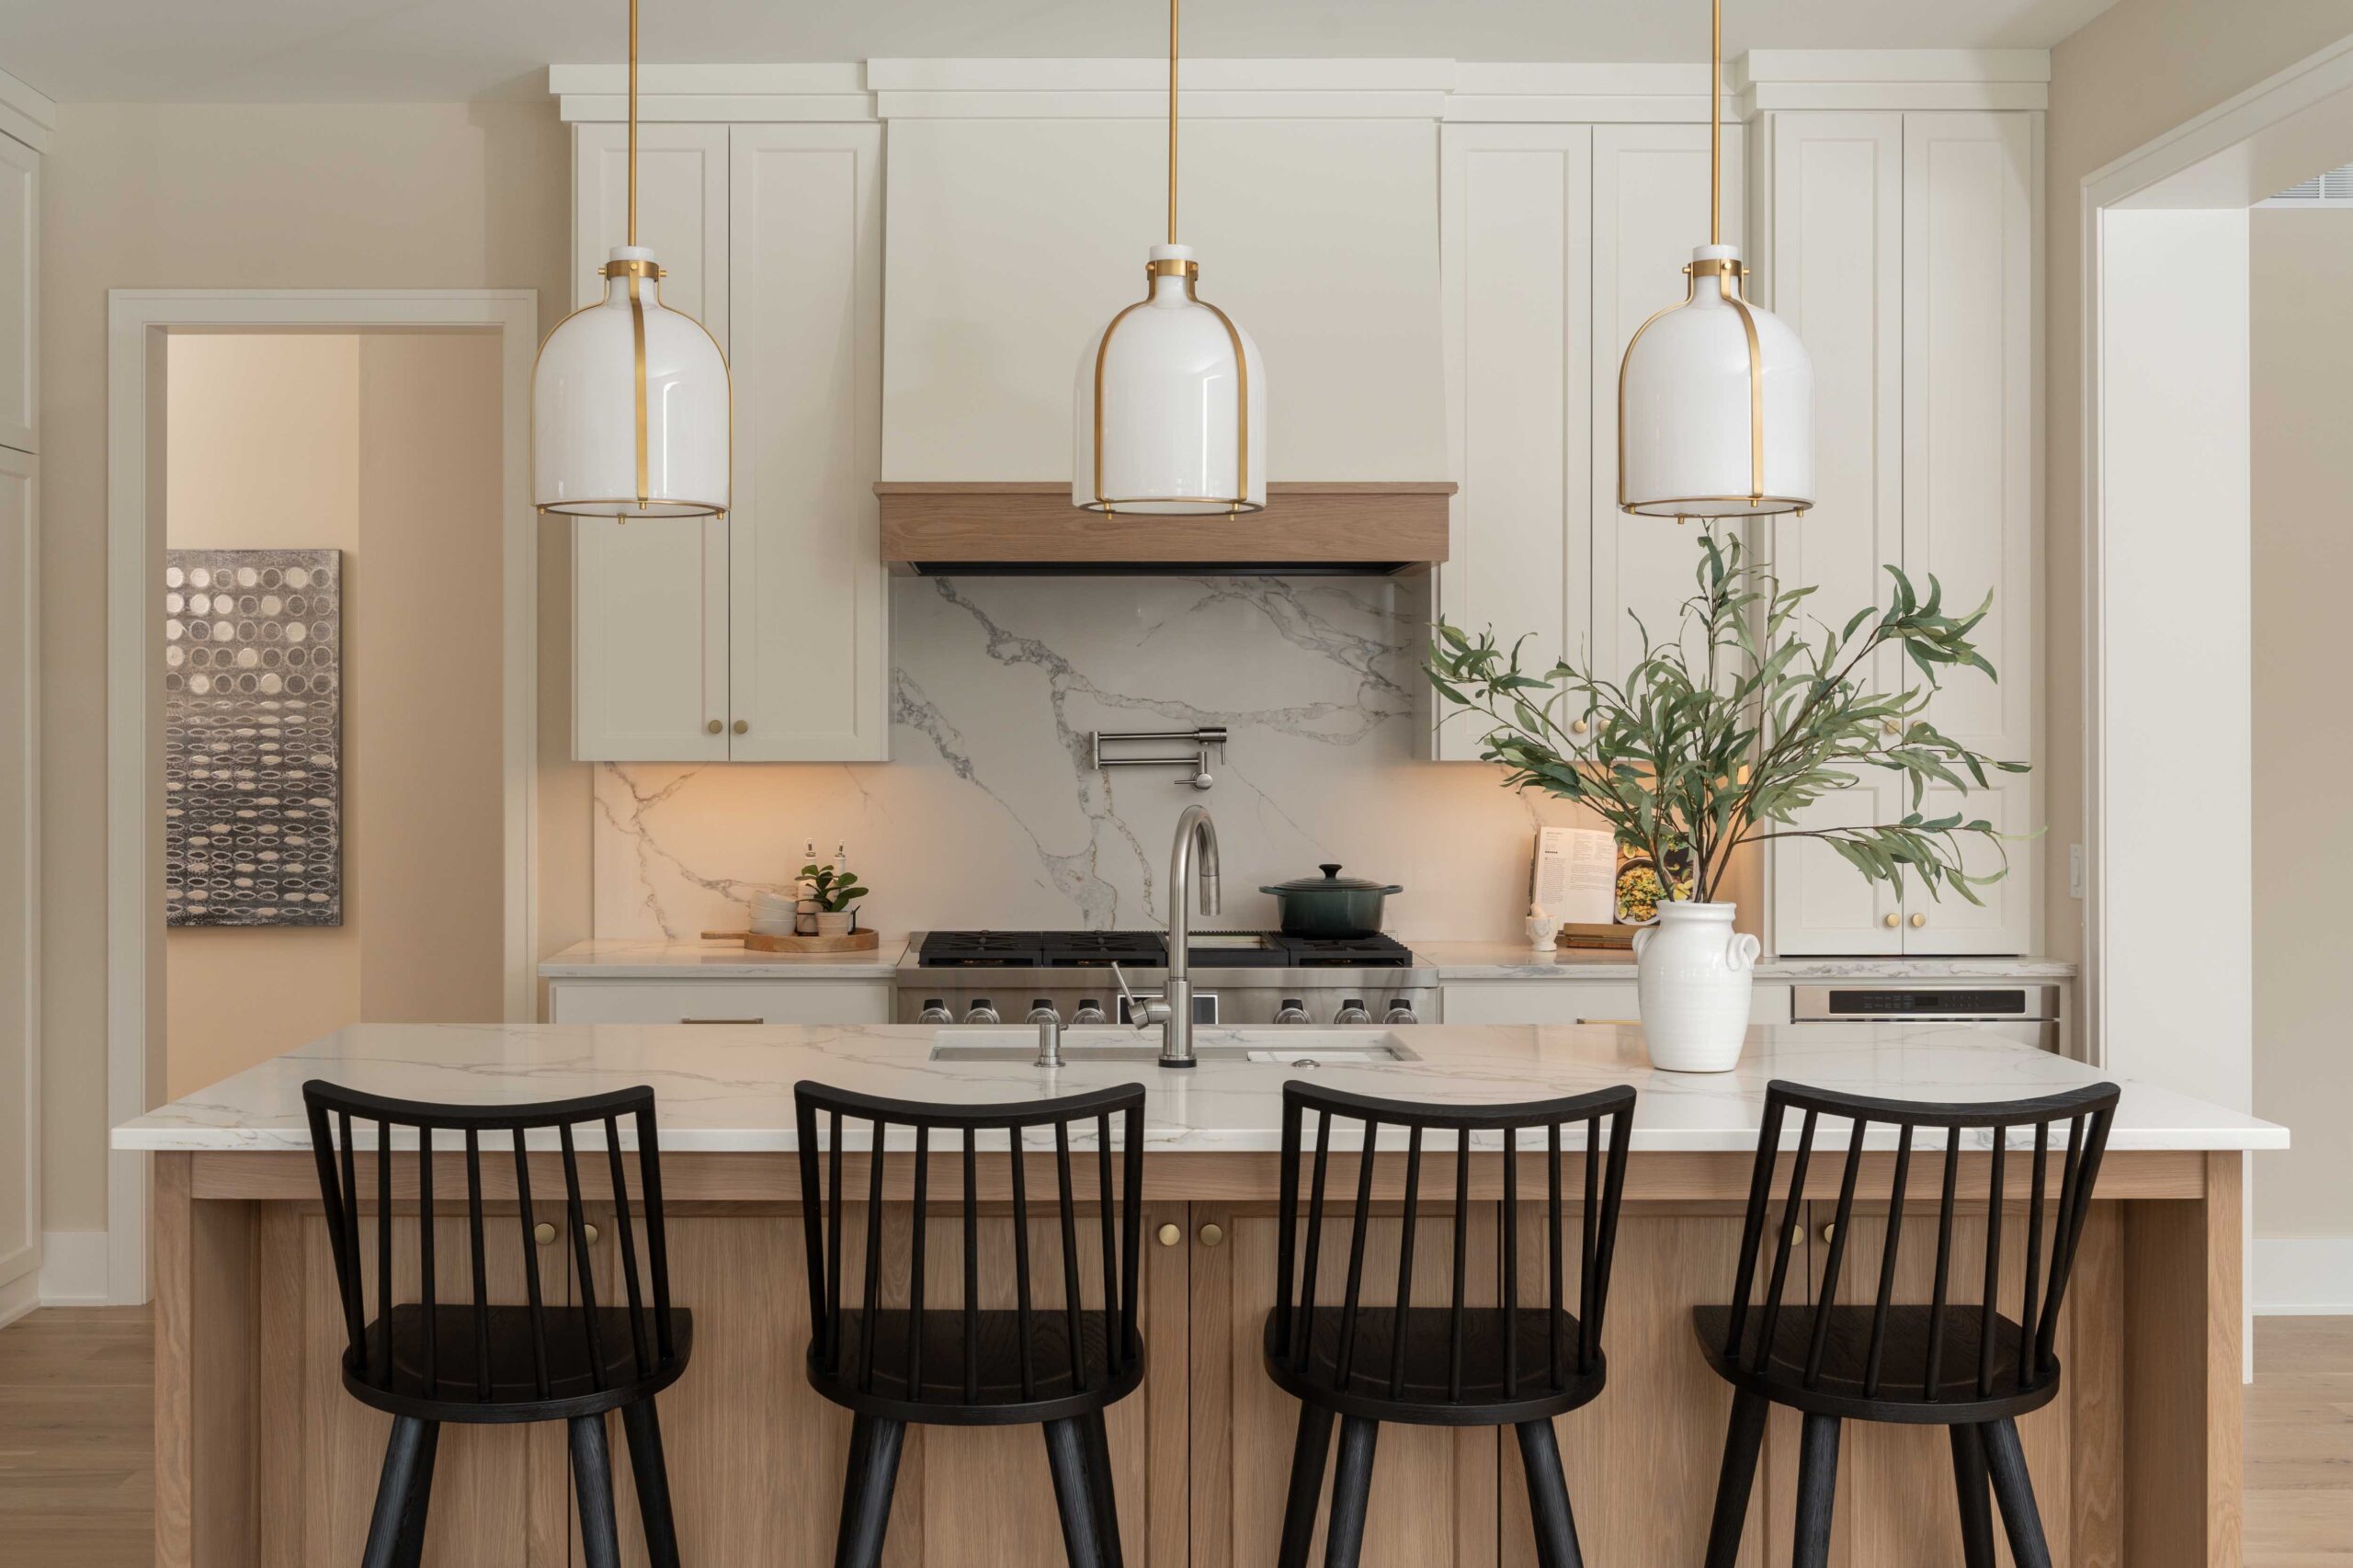 A kitchen in Eden Prairie with four black stools and a marble counter top.